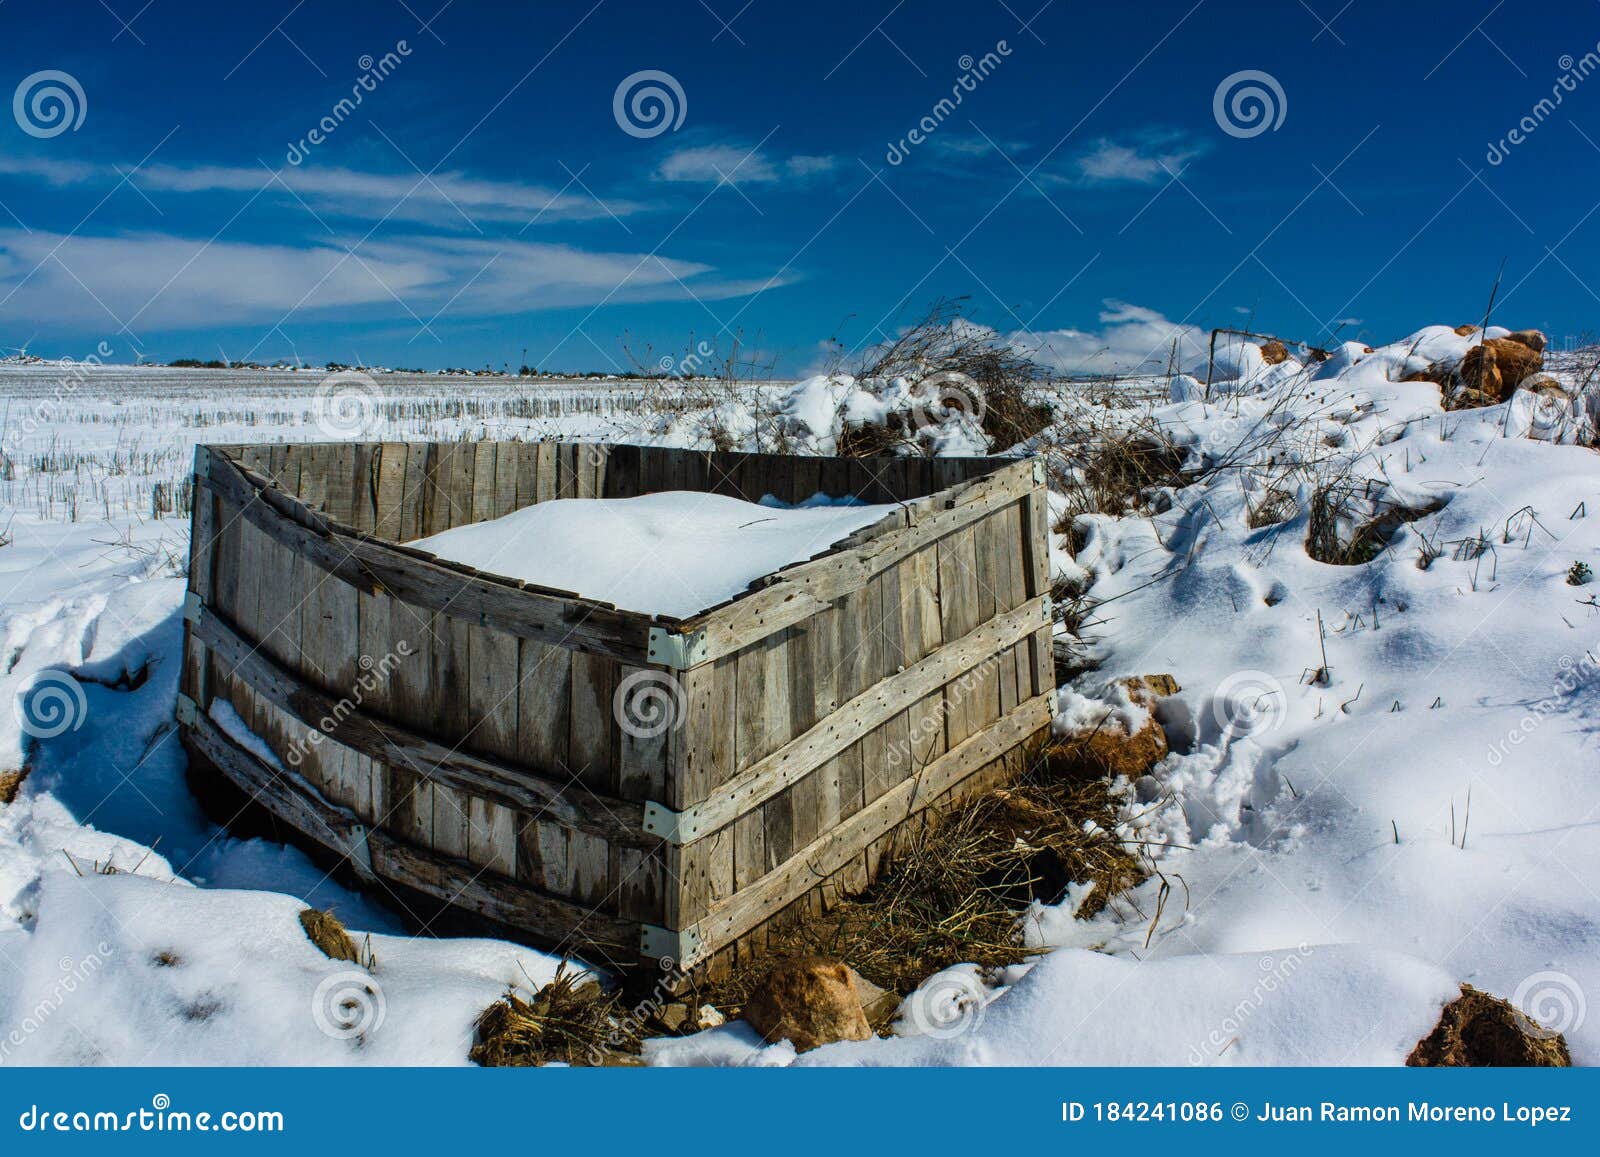 abandoned caisson covered with snow